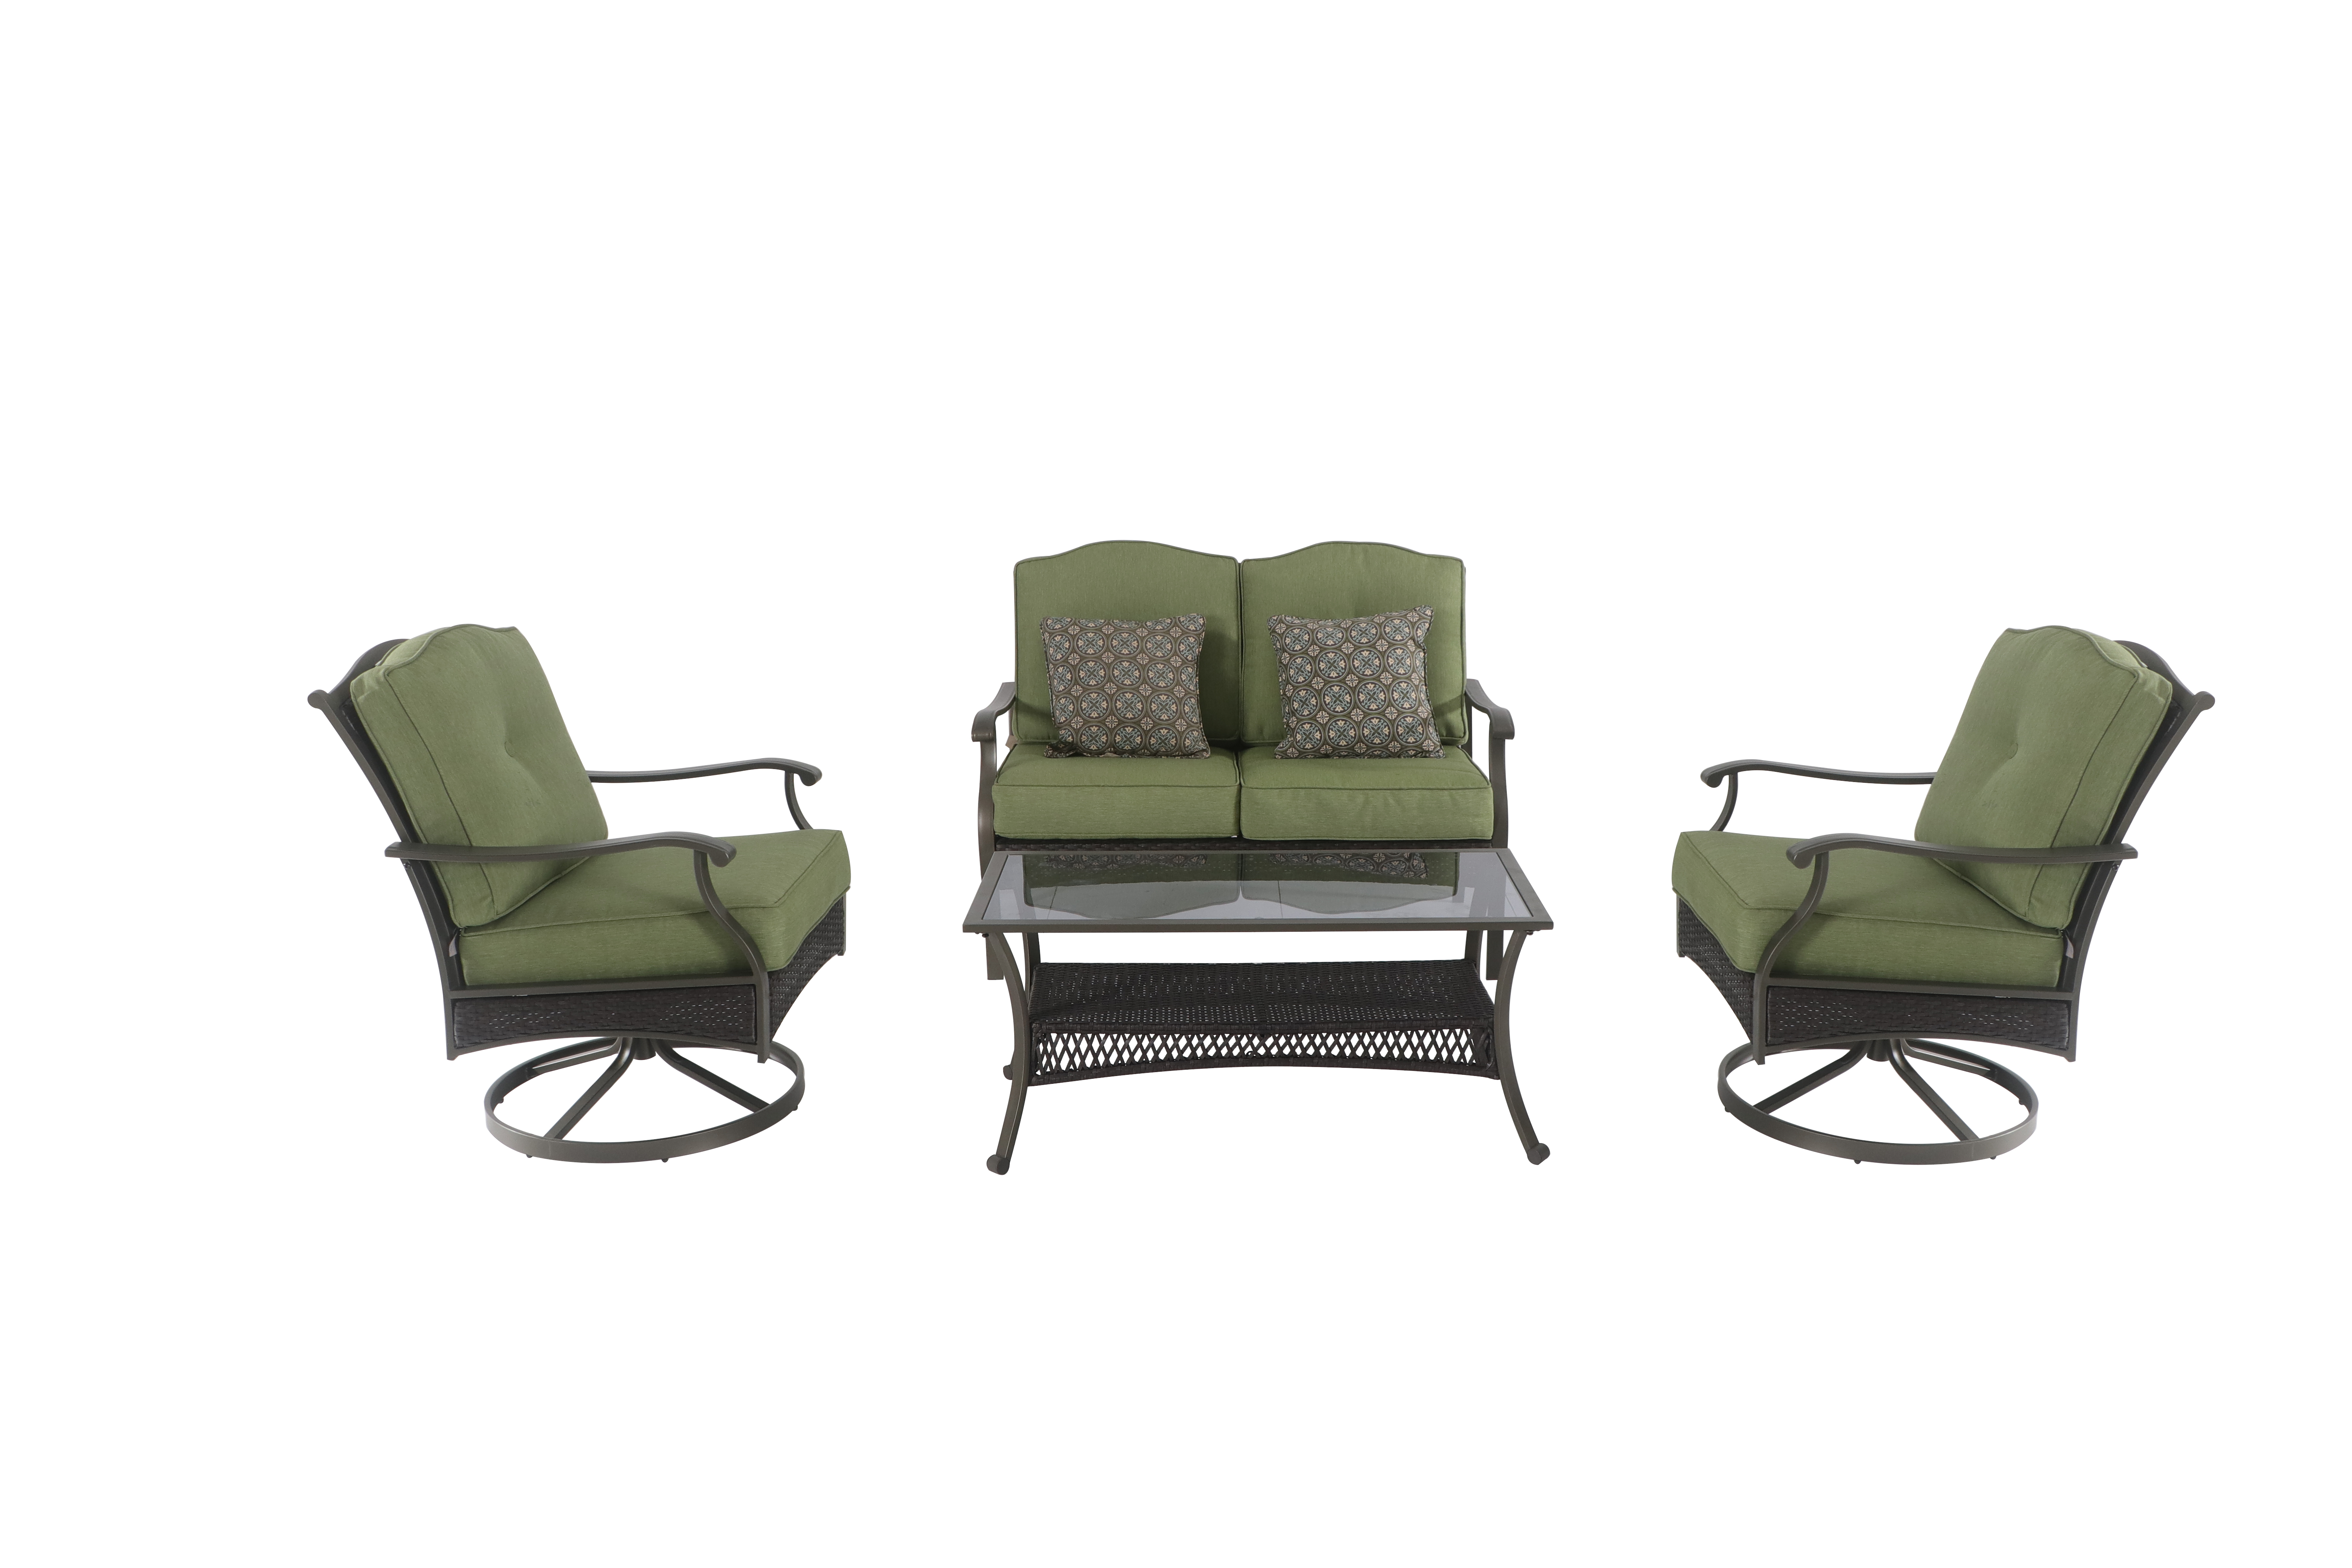 Better Homes & Gardens Providence 4-Piece Patio Conversation Set, Green - image 5 of 7